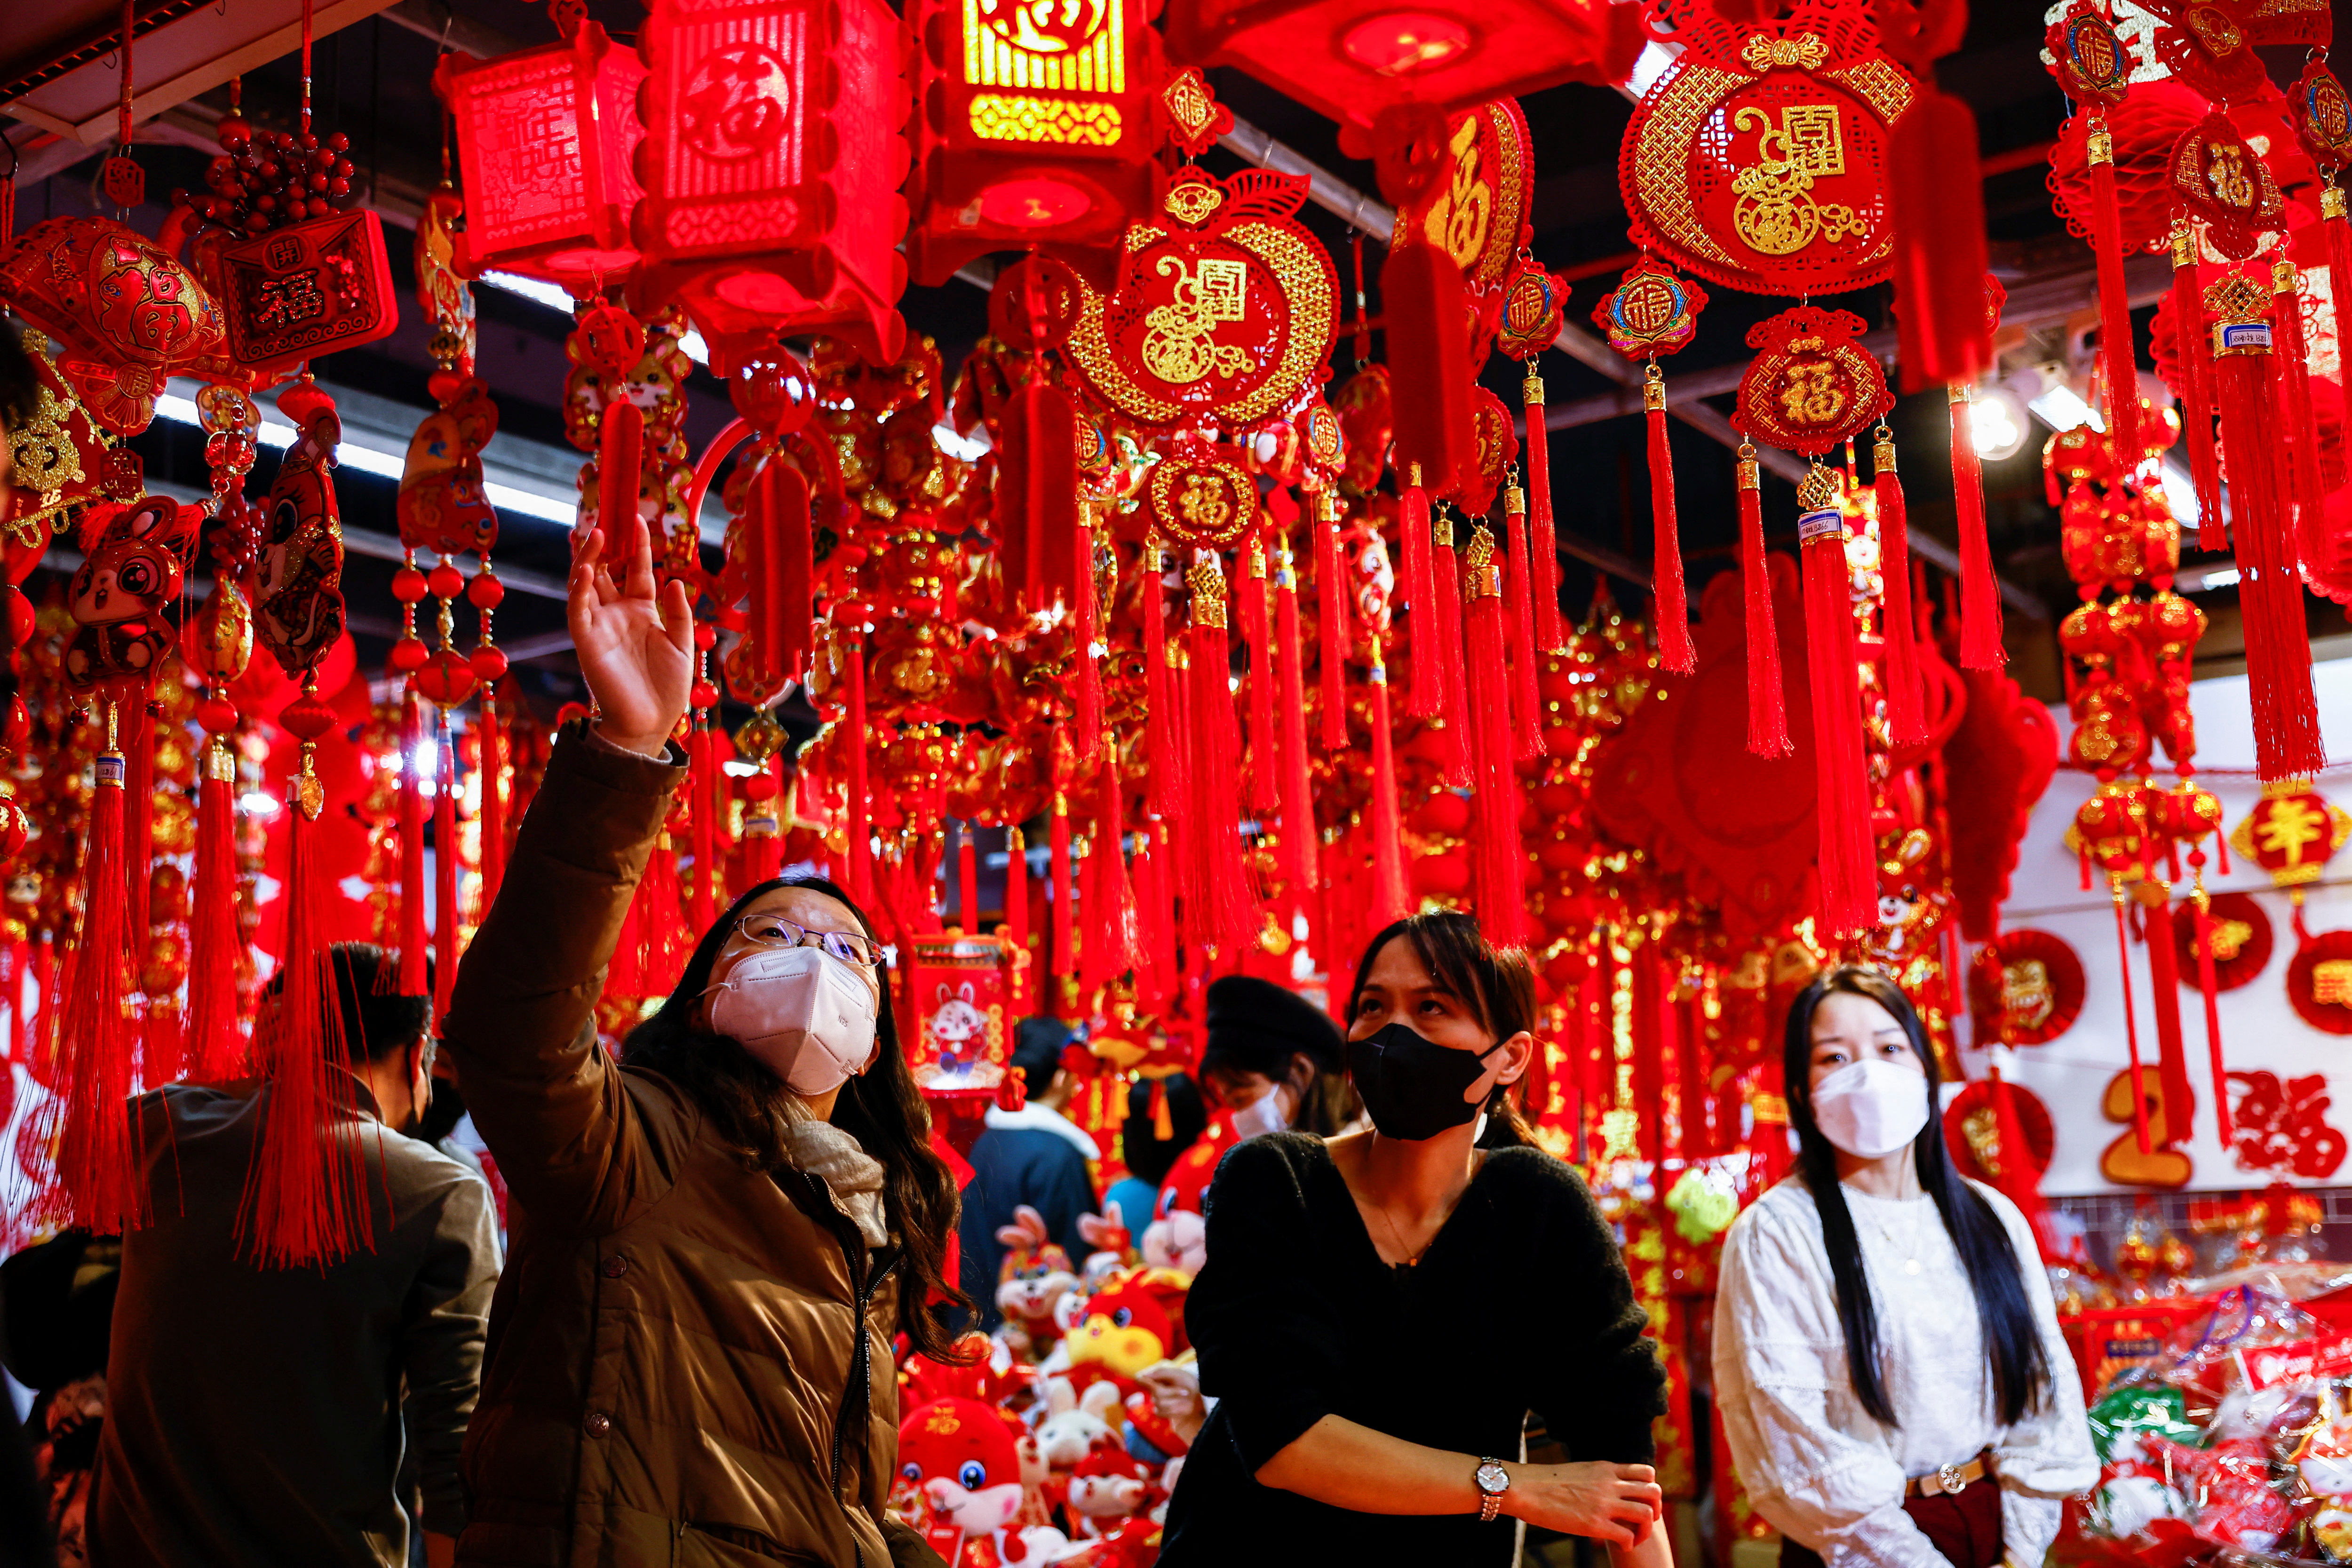 A customer looks at decorations for the Chinese Lunar New Year at a market selling Spring Festival ornaments ahead of the Chinese Lunar New Year festivity, in Beijing, China on January 7, 2023. (Reuters)